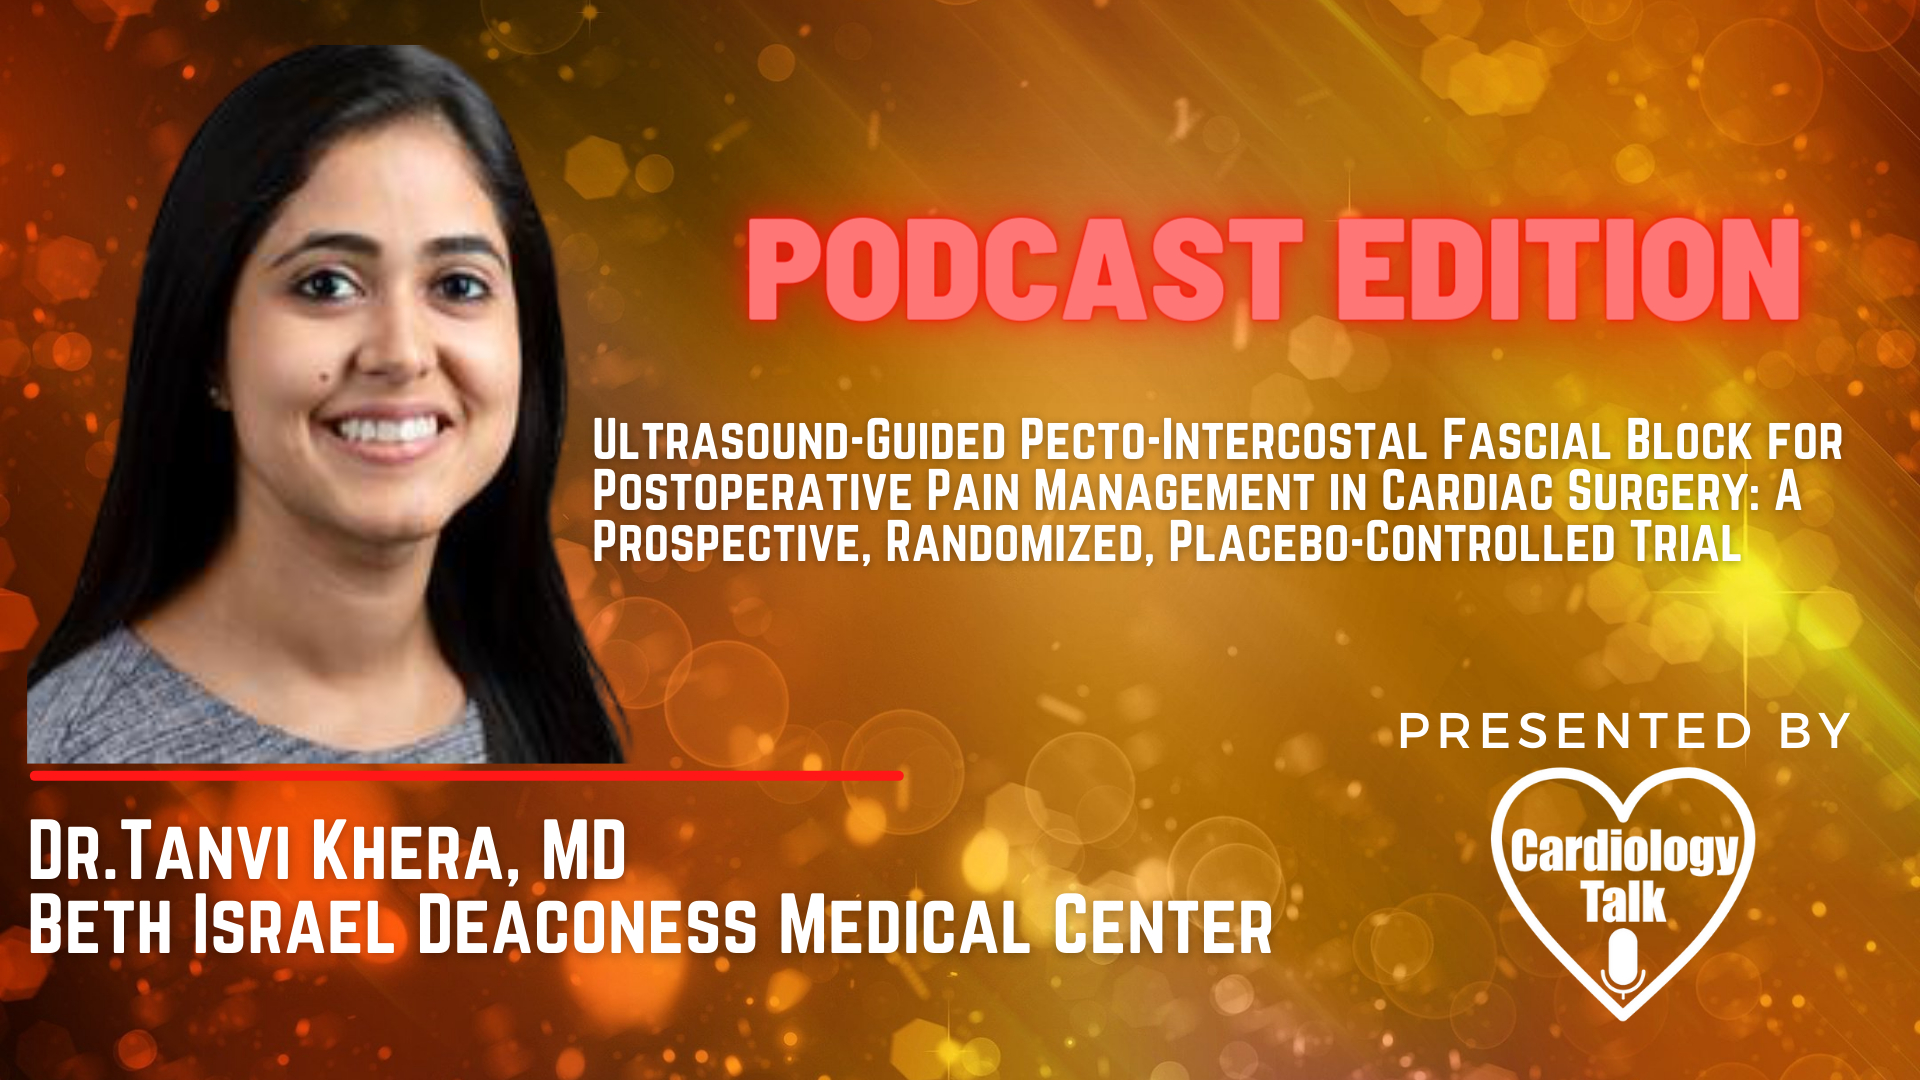 Tanvi Khera, MD- Ultrasound-Guided Pecto-Intercostal Fascial Block for Postoperative Pain Management in Cardiac Surgery: A Prospective, Randomized, Placebo-Controlled Trial